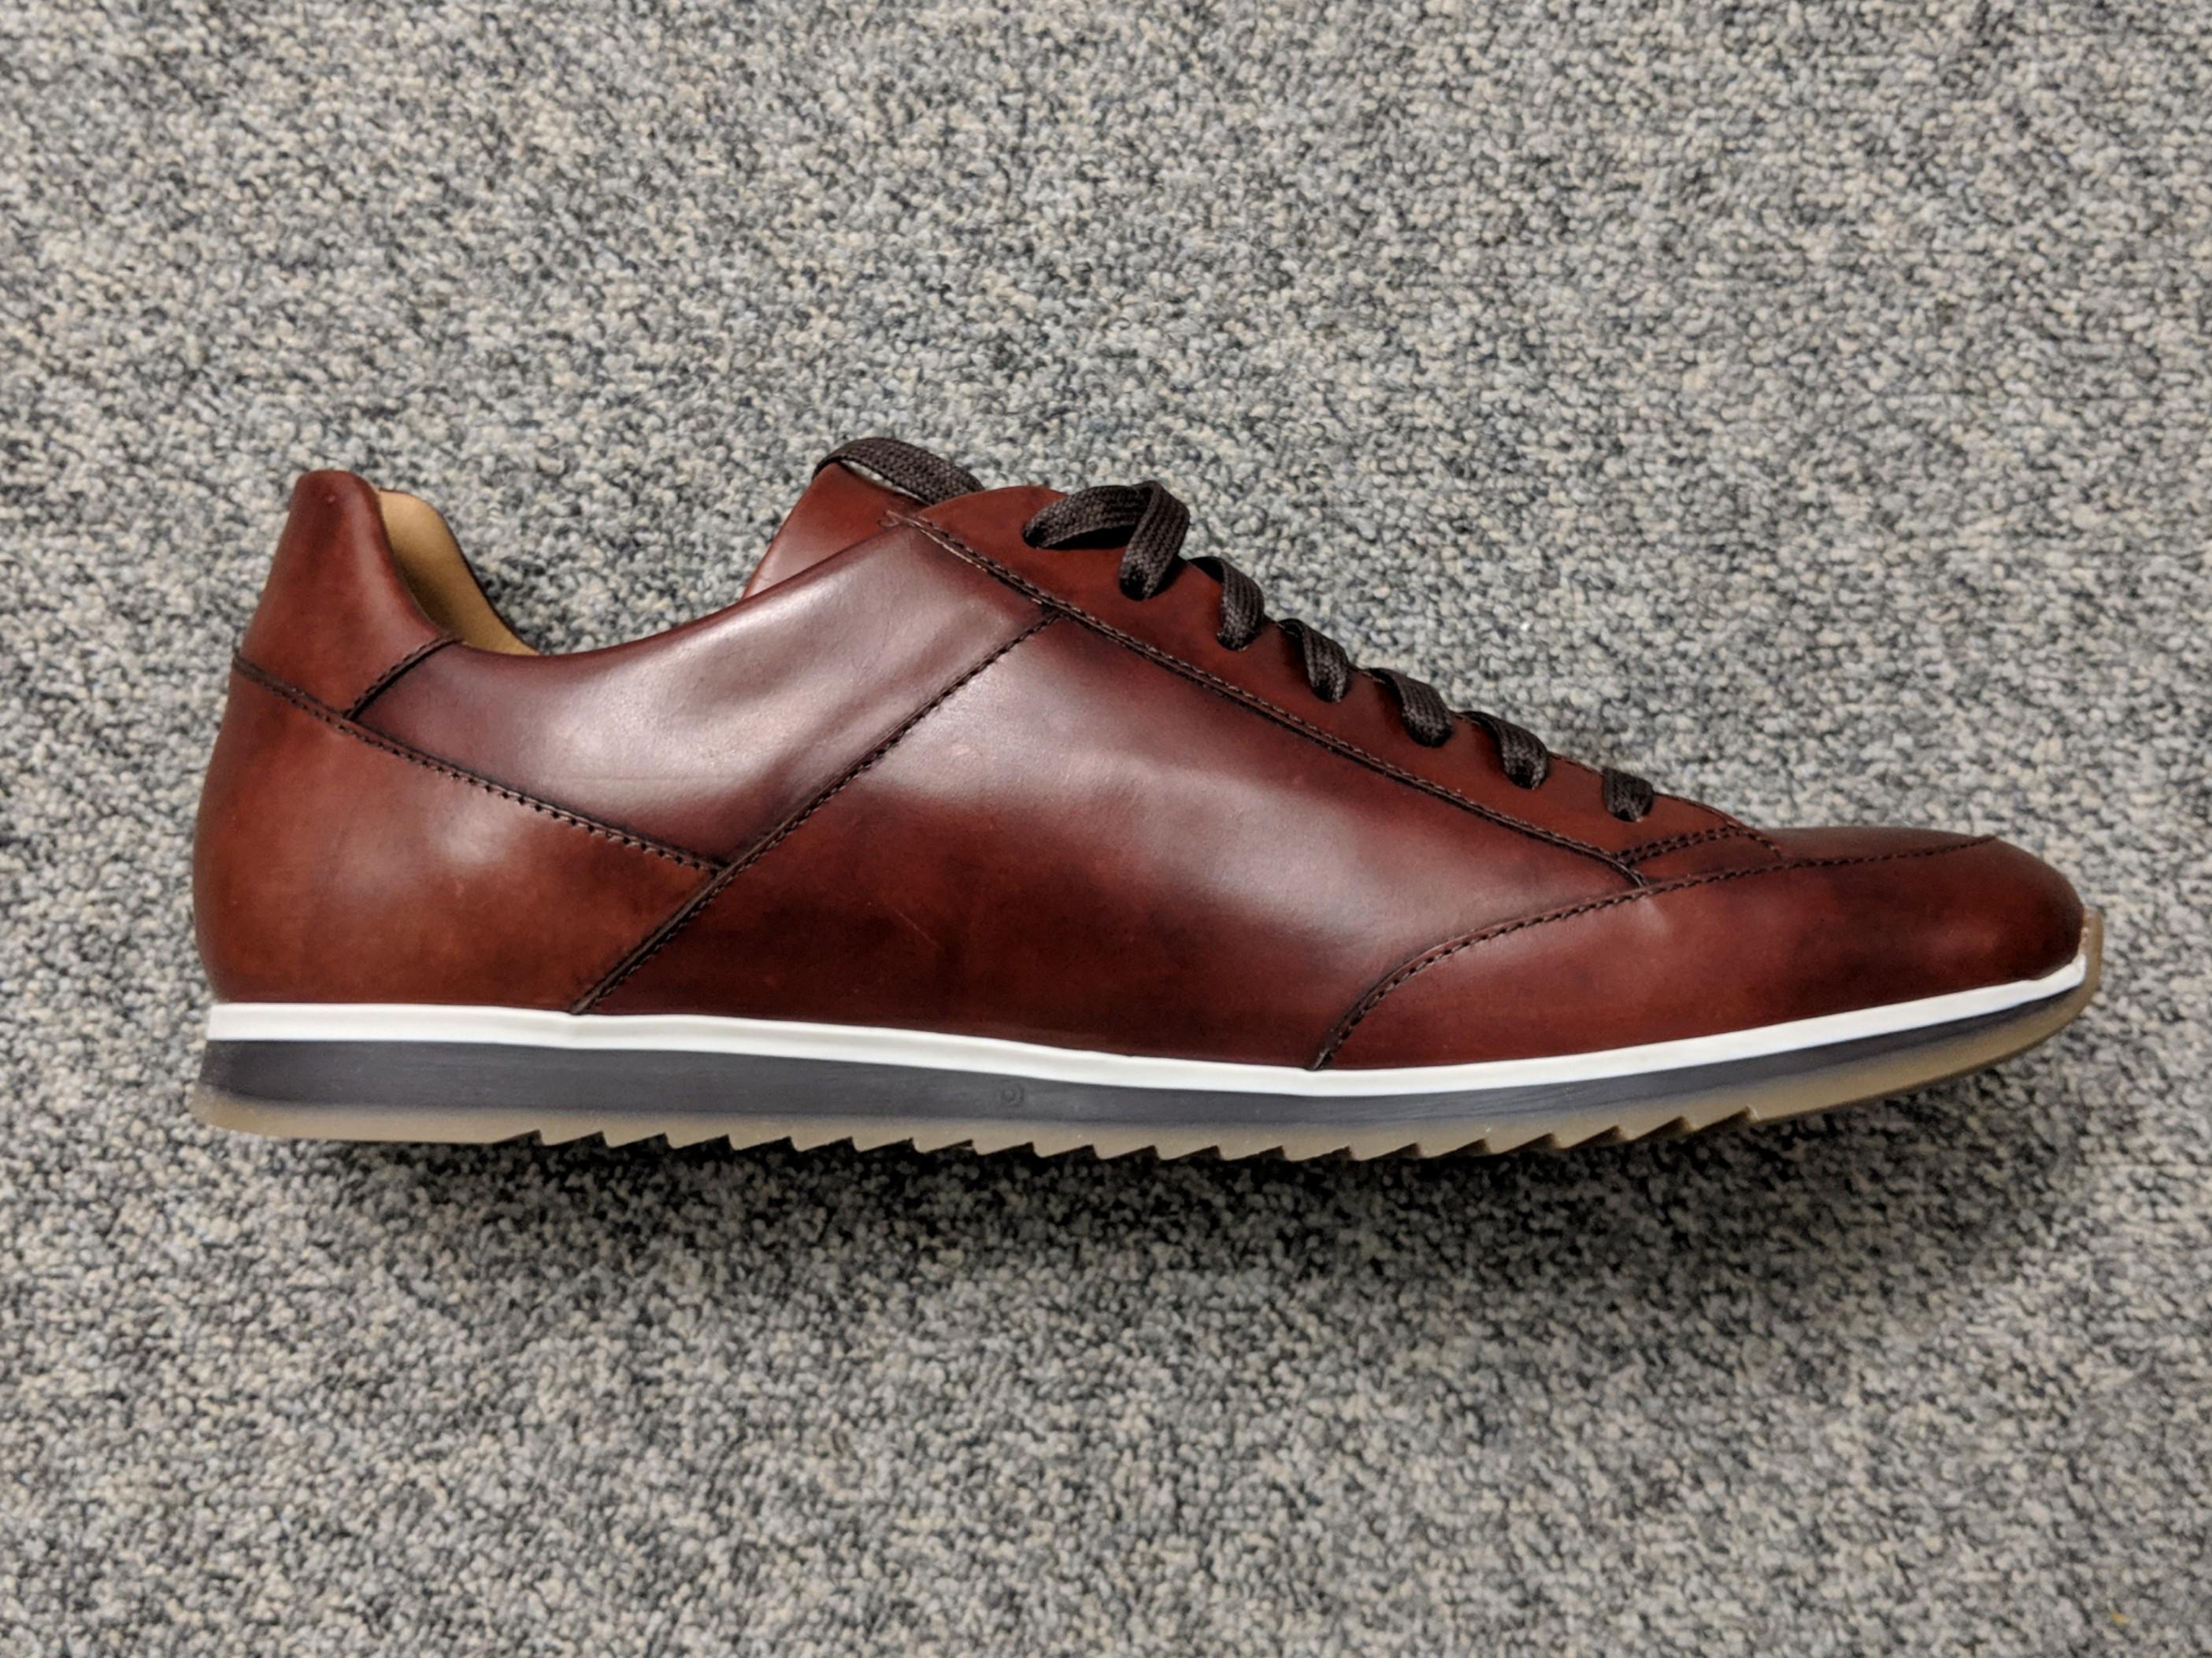 magnanni red sneakers